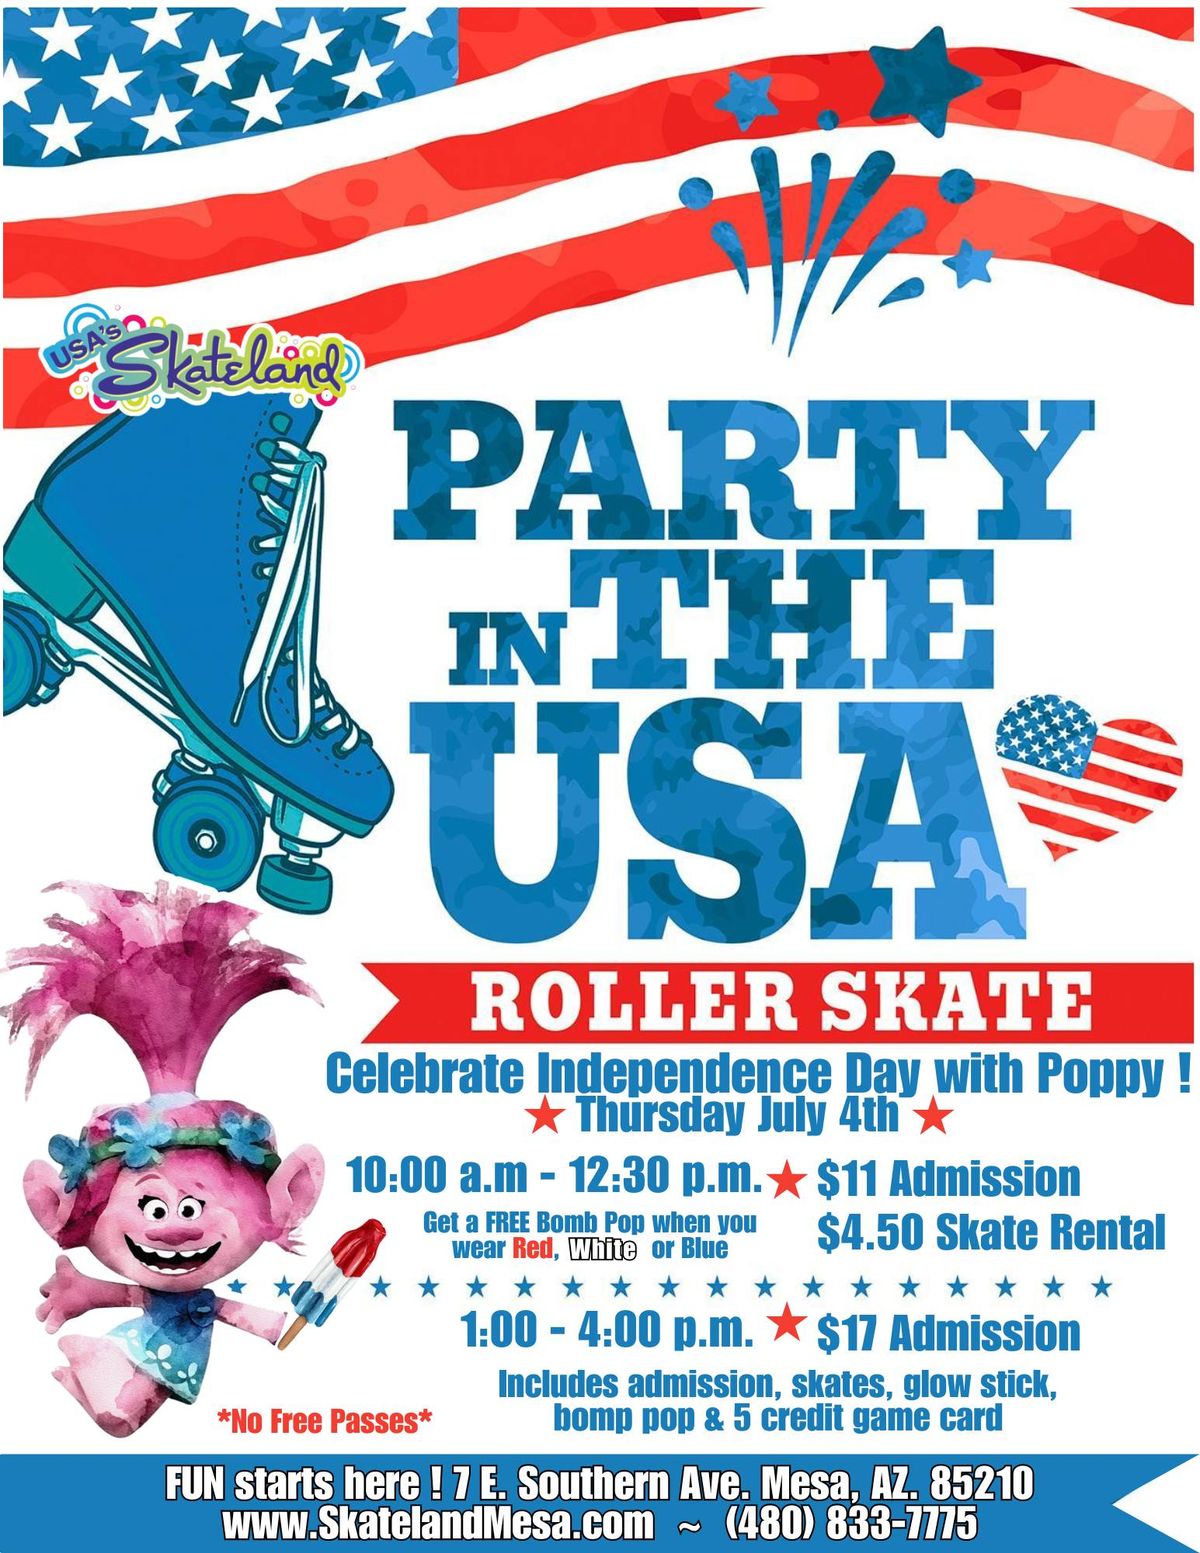 Party in the USA with Poppy!